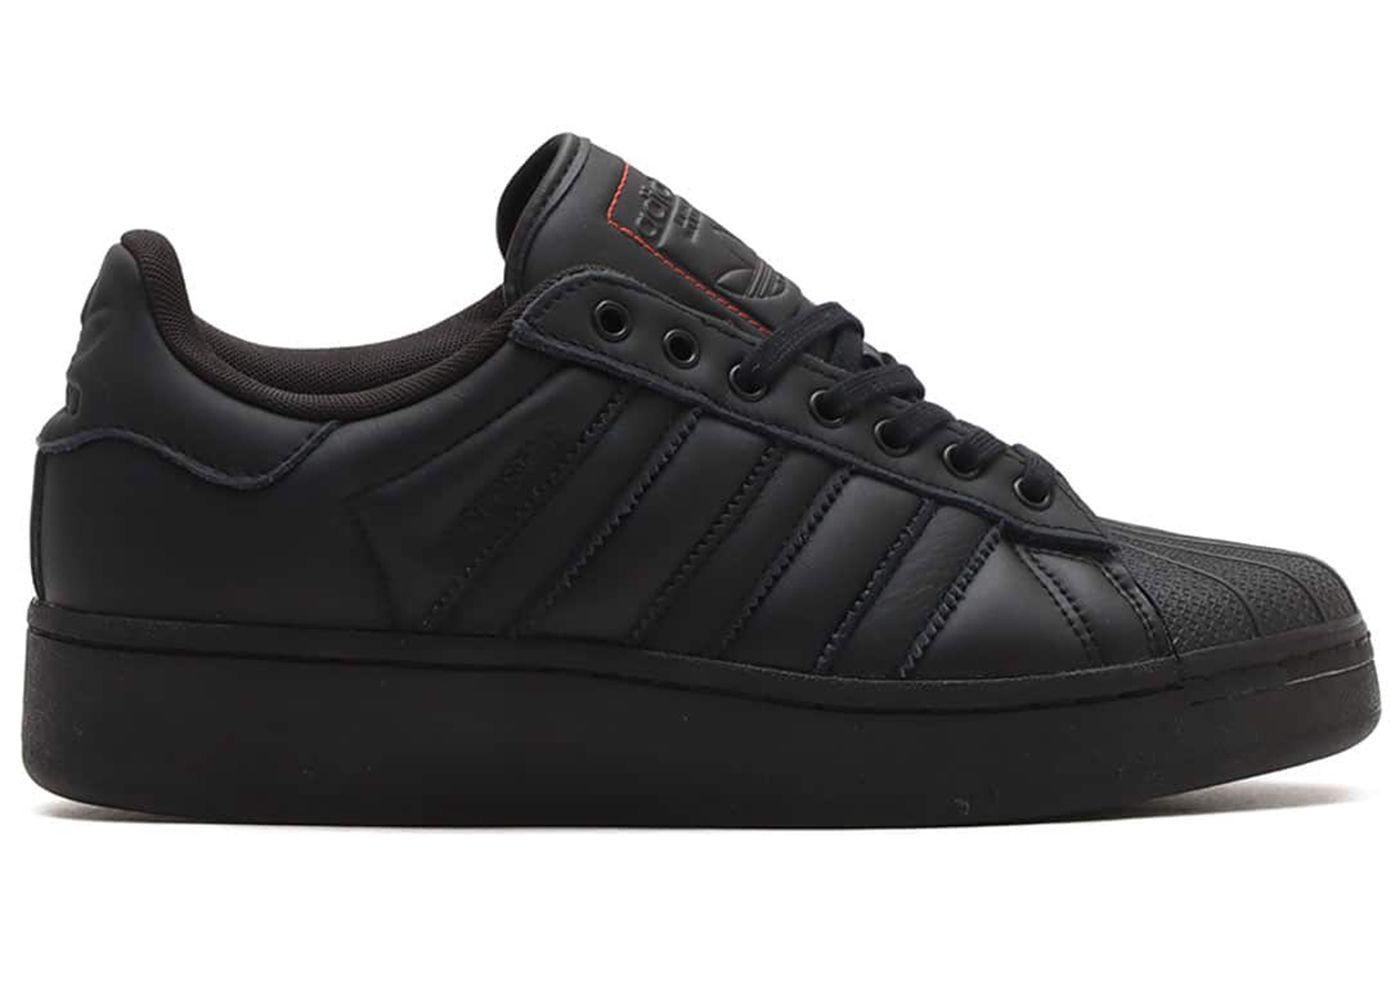 adidas Superstar XLG atmos Black Red Men's - IF6290 - GB